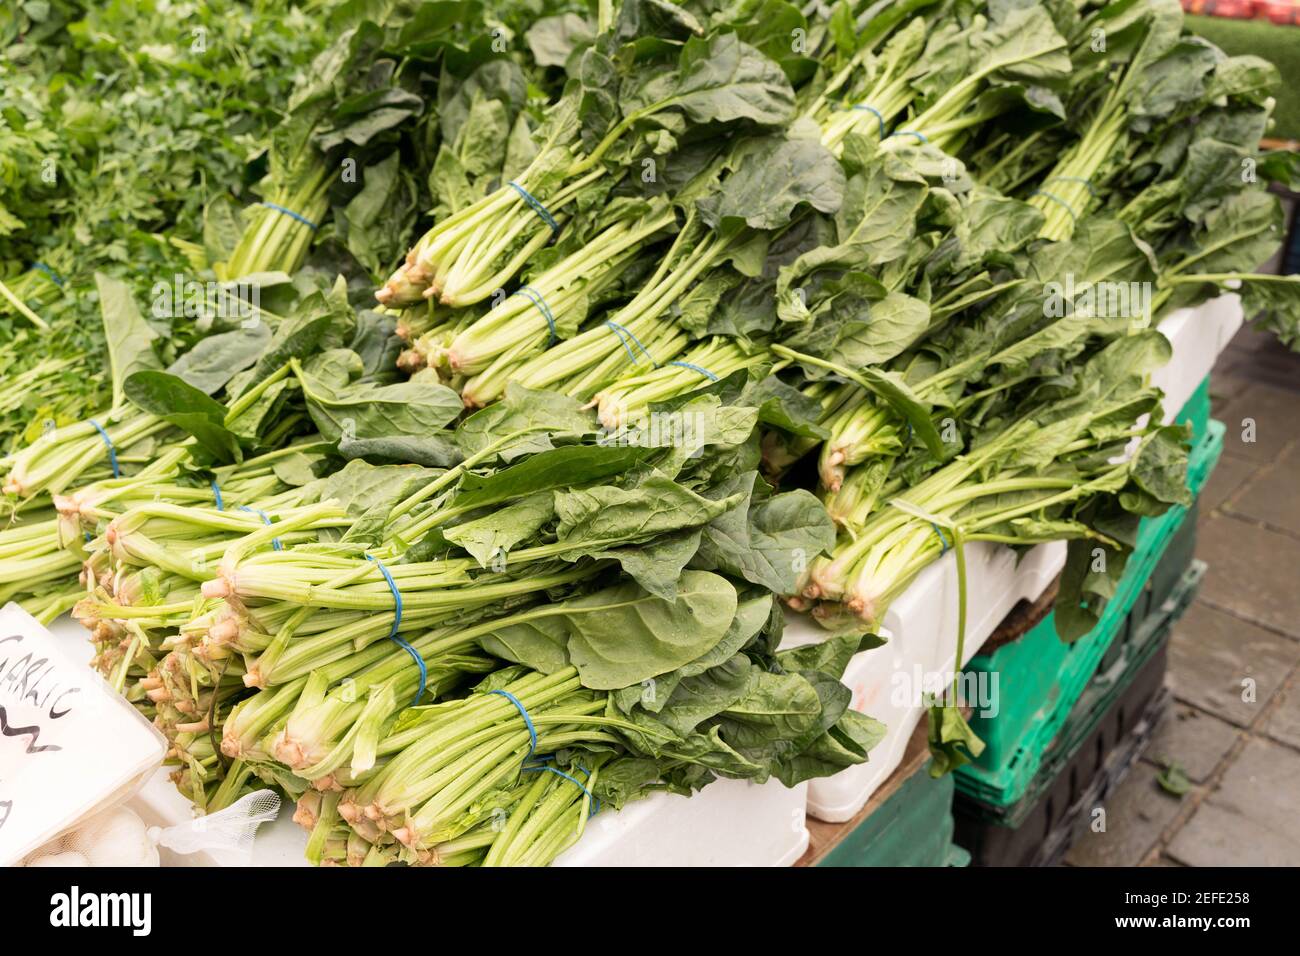 bunches of Spinach on sale in market stall Stock Photo